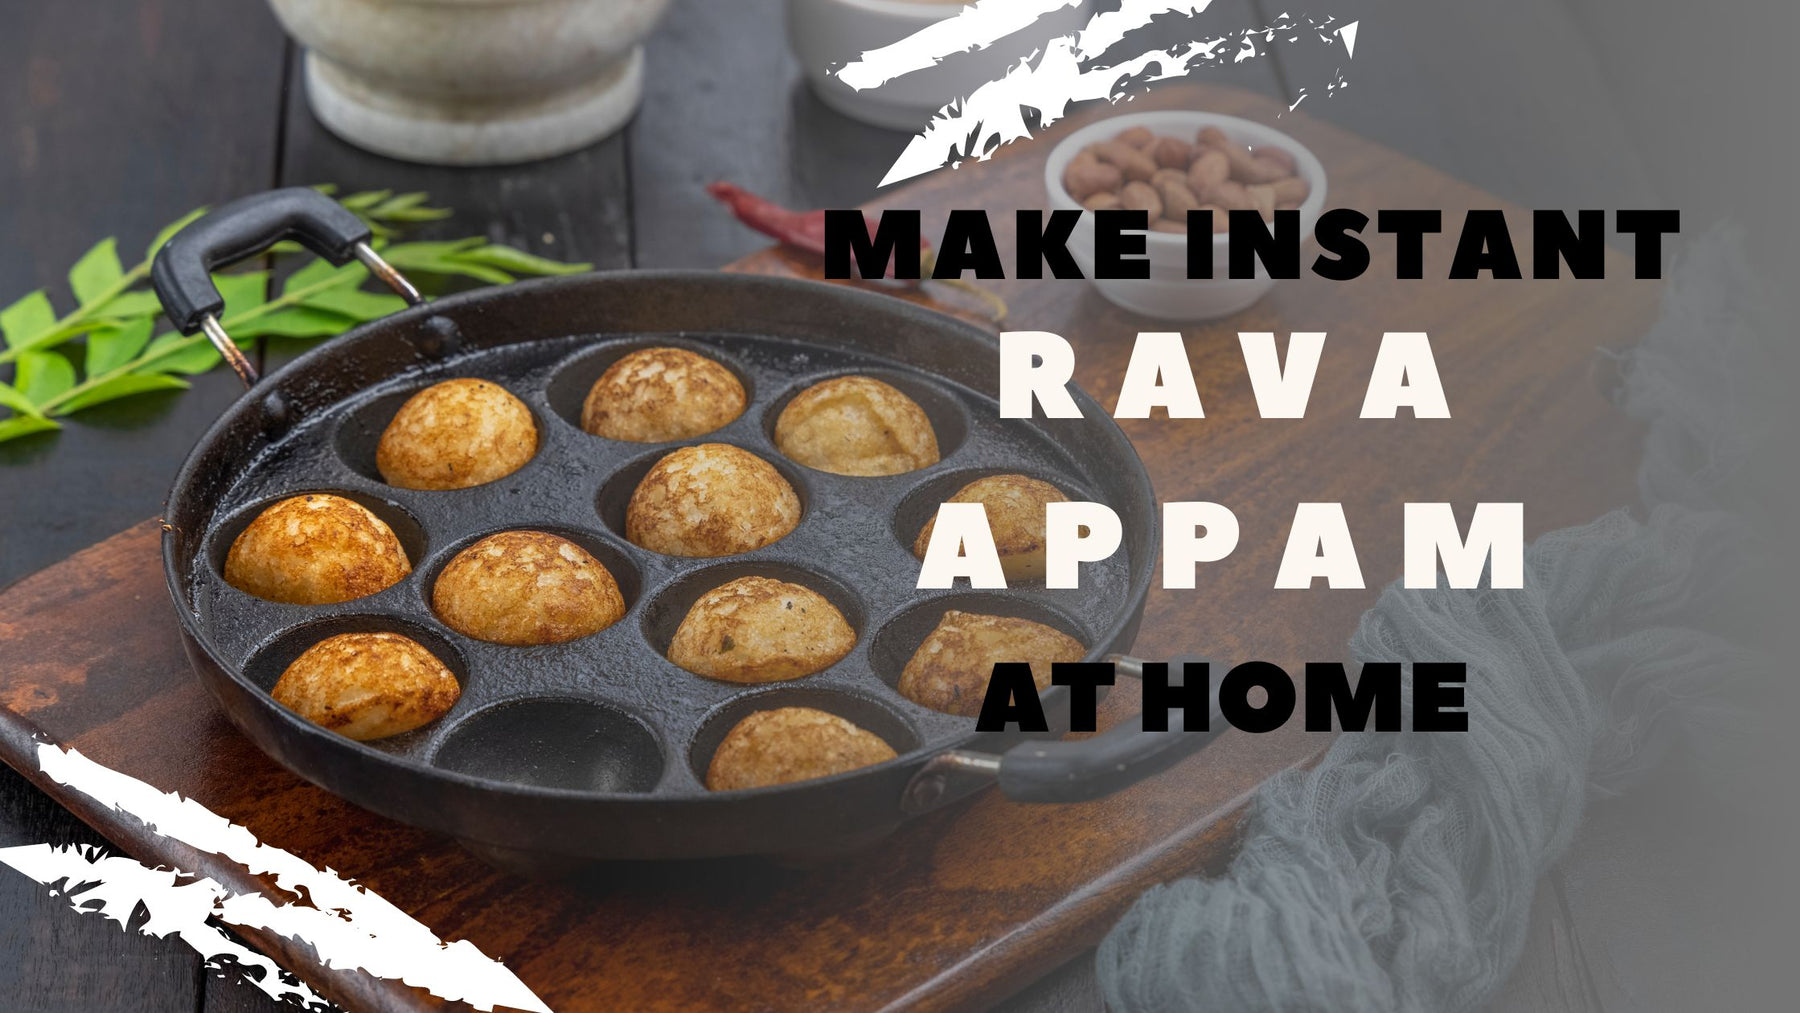 How To Make Instant Rava Appam at Home